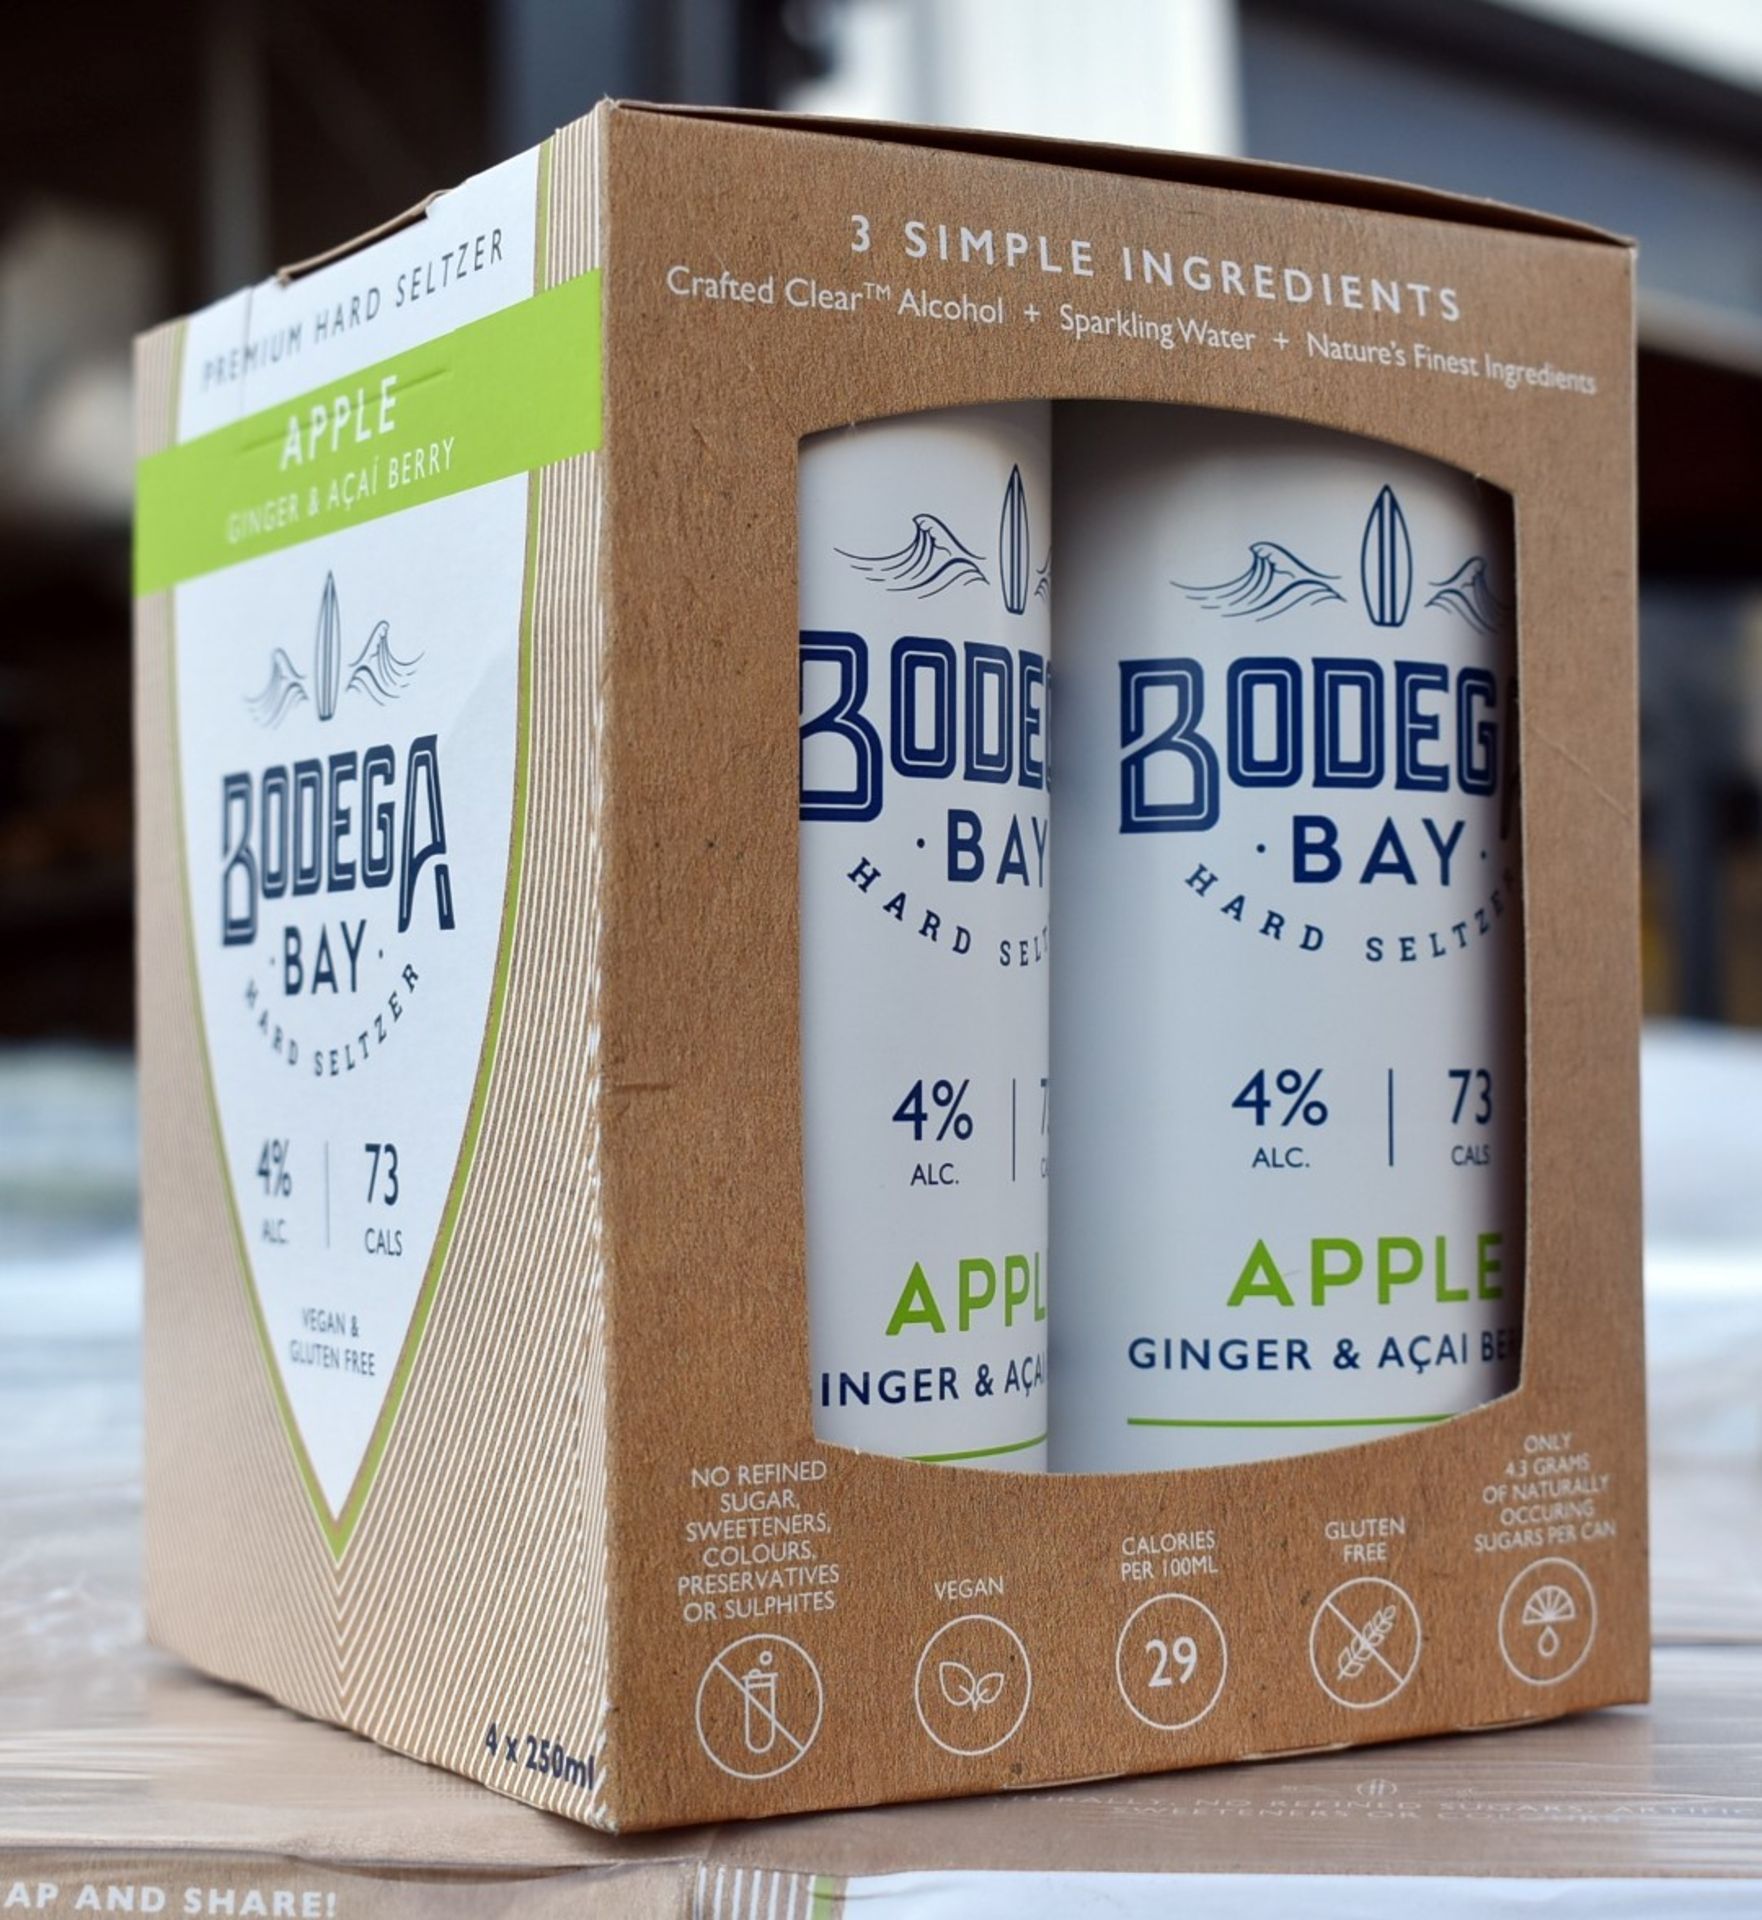 360 x Cans of Bodega Bay Hard Seltzer 250ml Alcoholic Sparkling Water Drinks - Various Flavours - Image 7 of 15